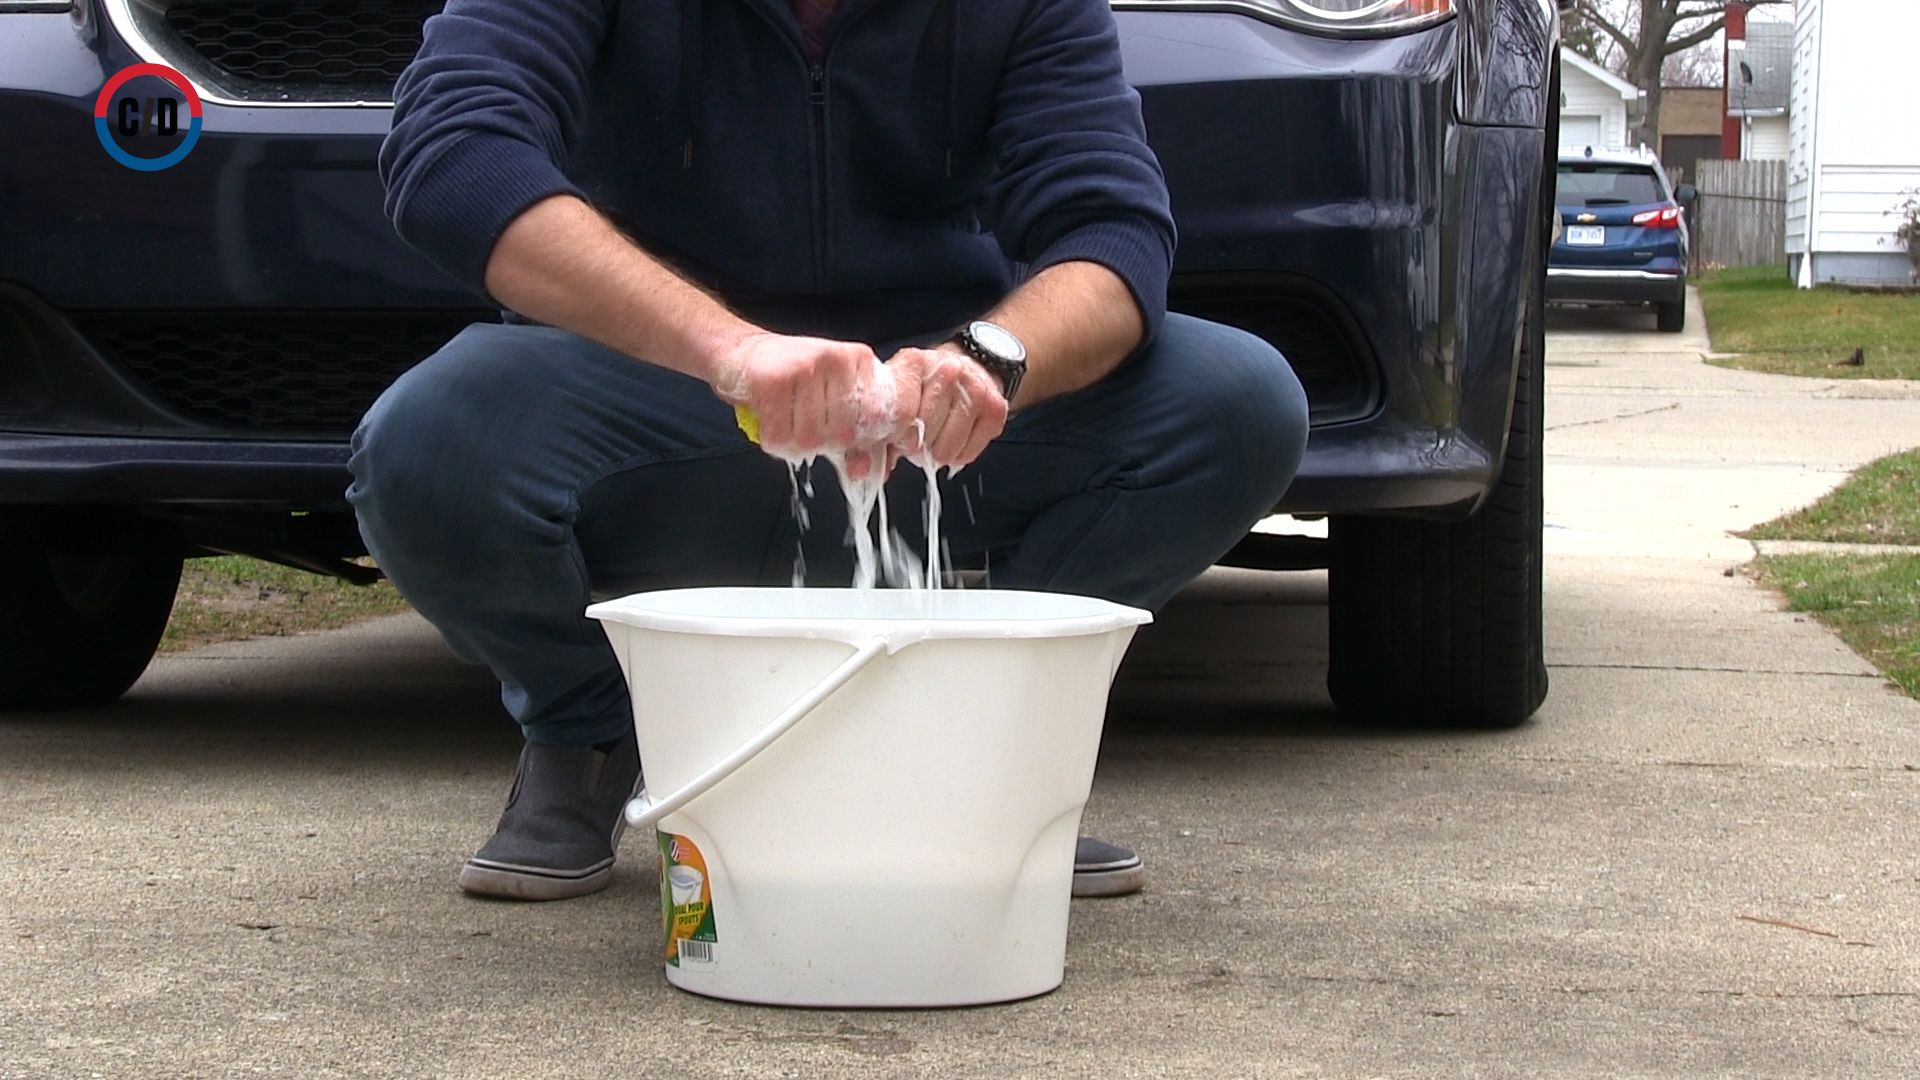 How Many Buckets Do You Need To Wash a Car?